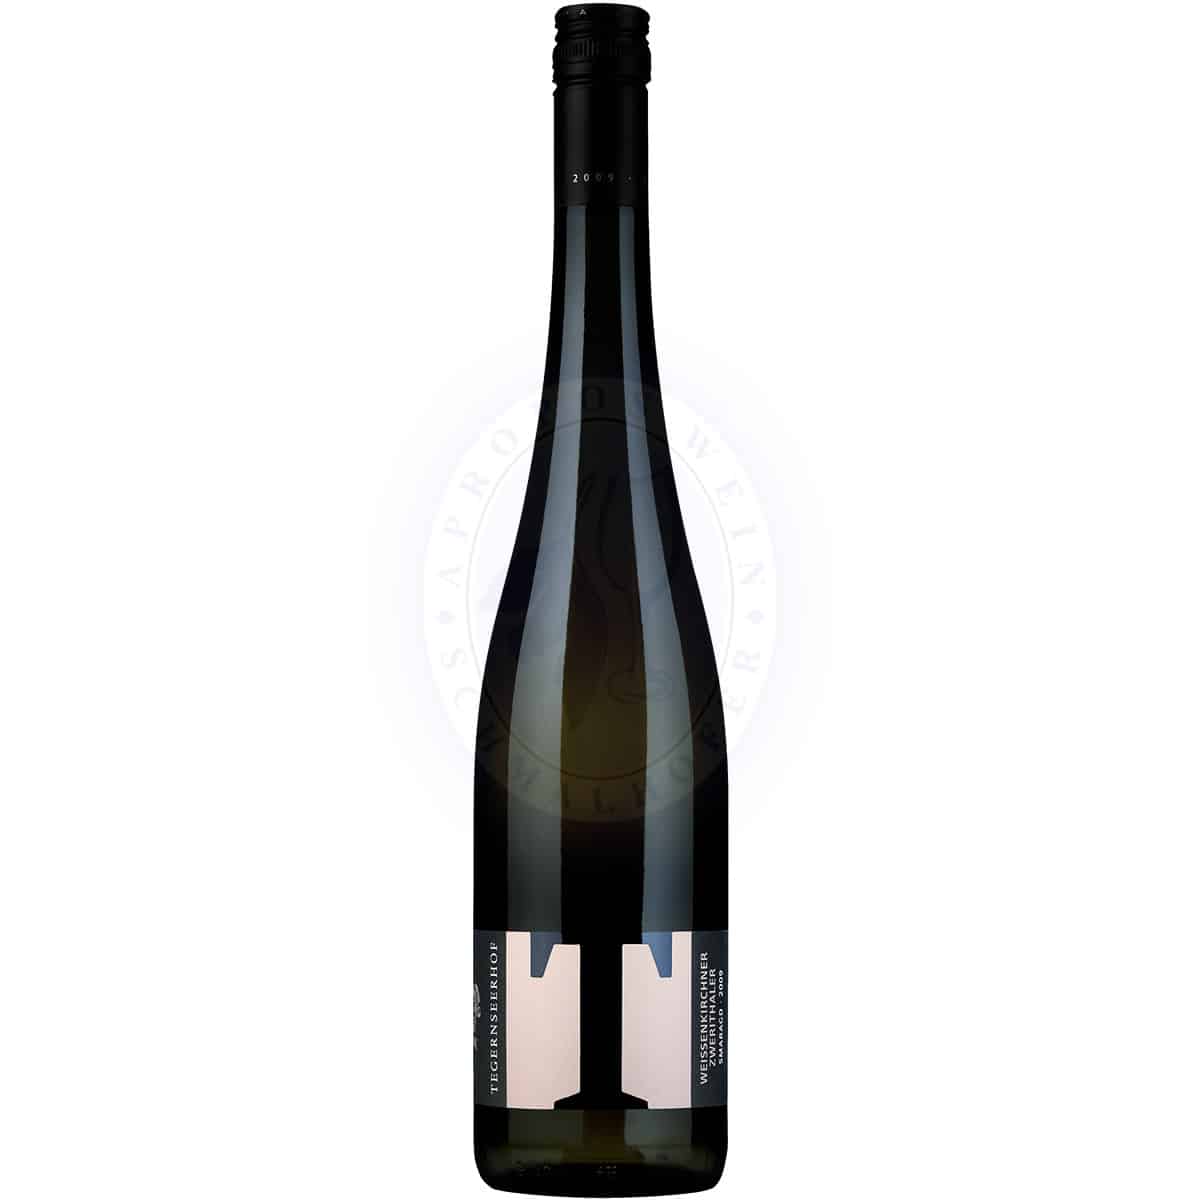 wein.plus find+buy: The members our of wein.plus wines find+buy 